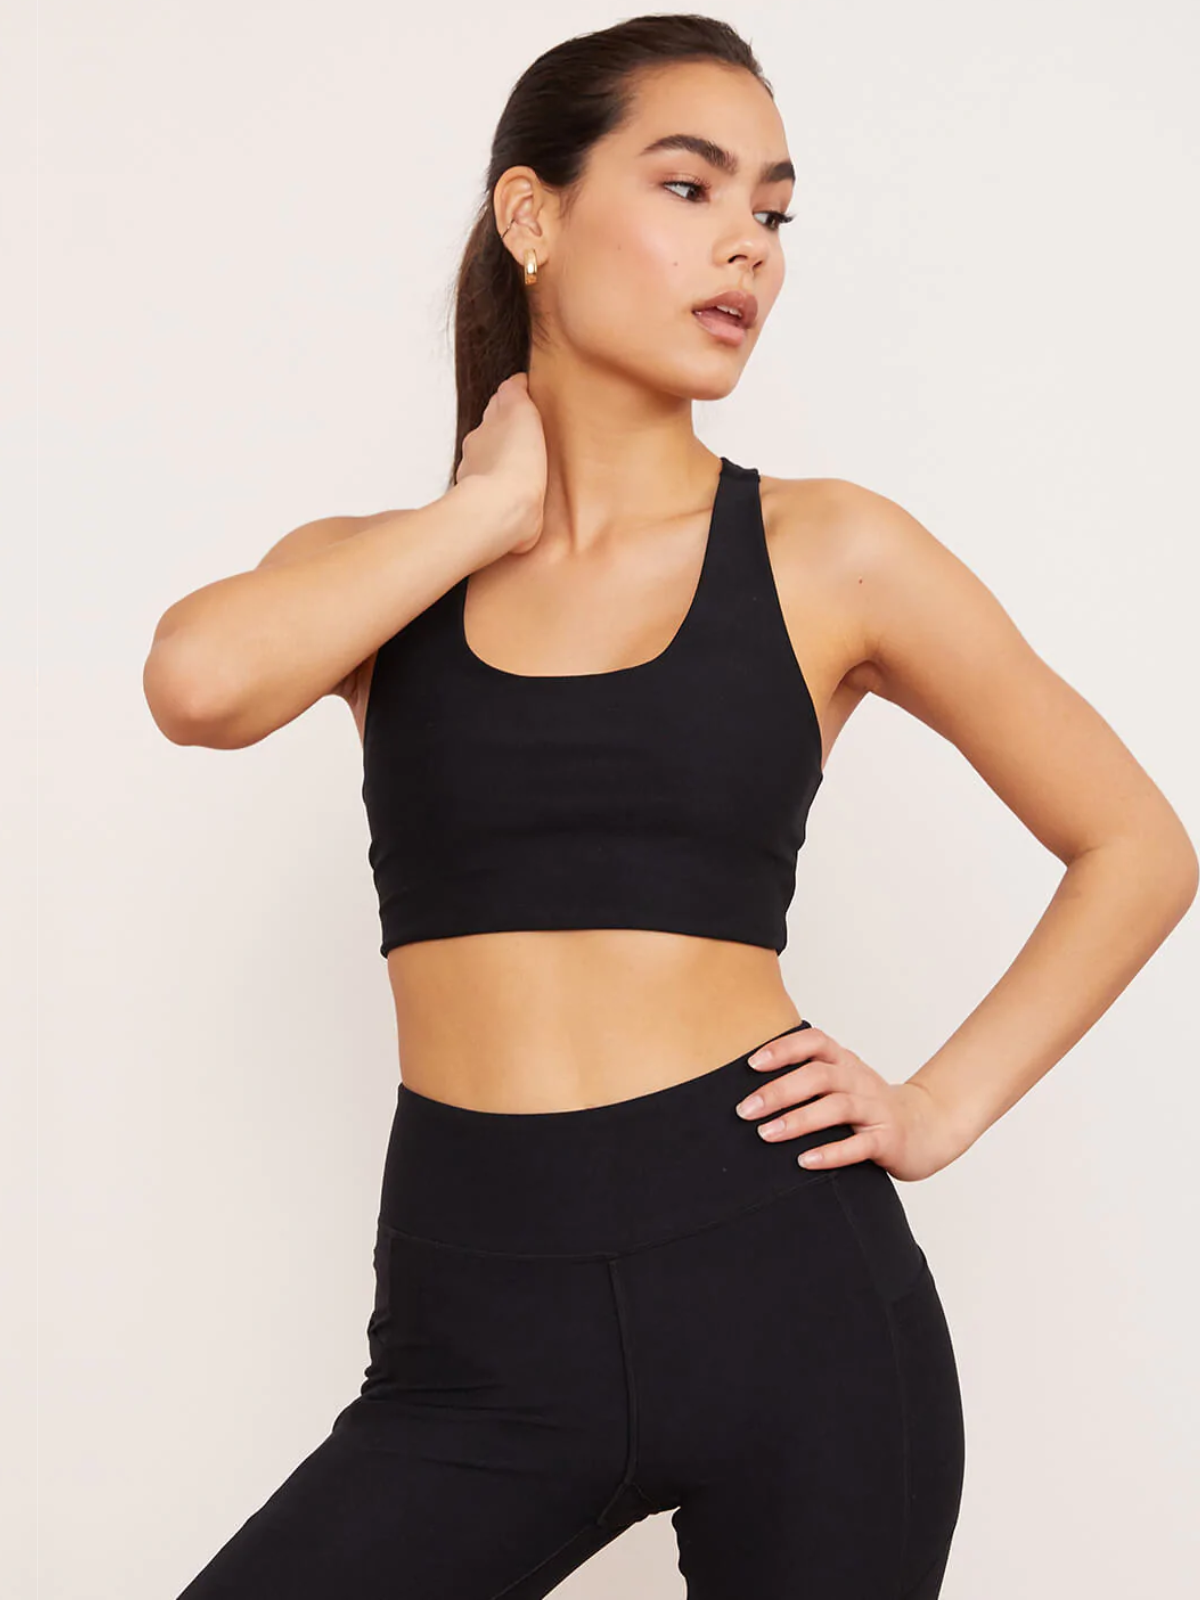 Wolven Yoga Bra Top  Sustainably made of recycled plastic